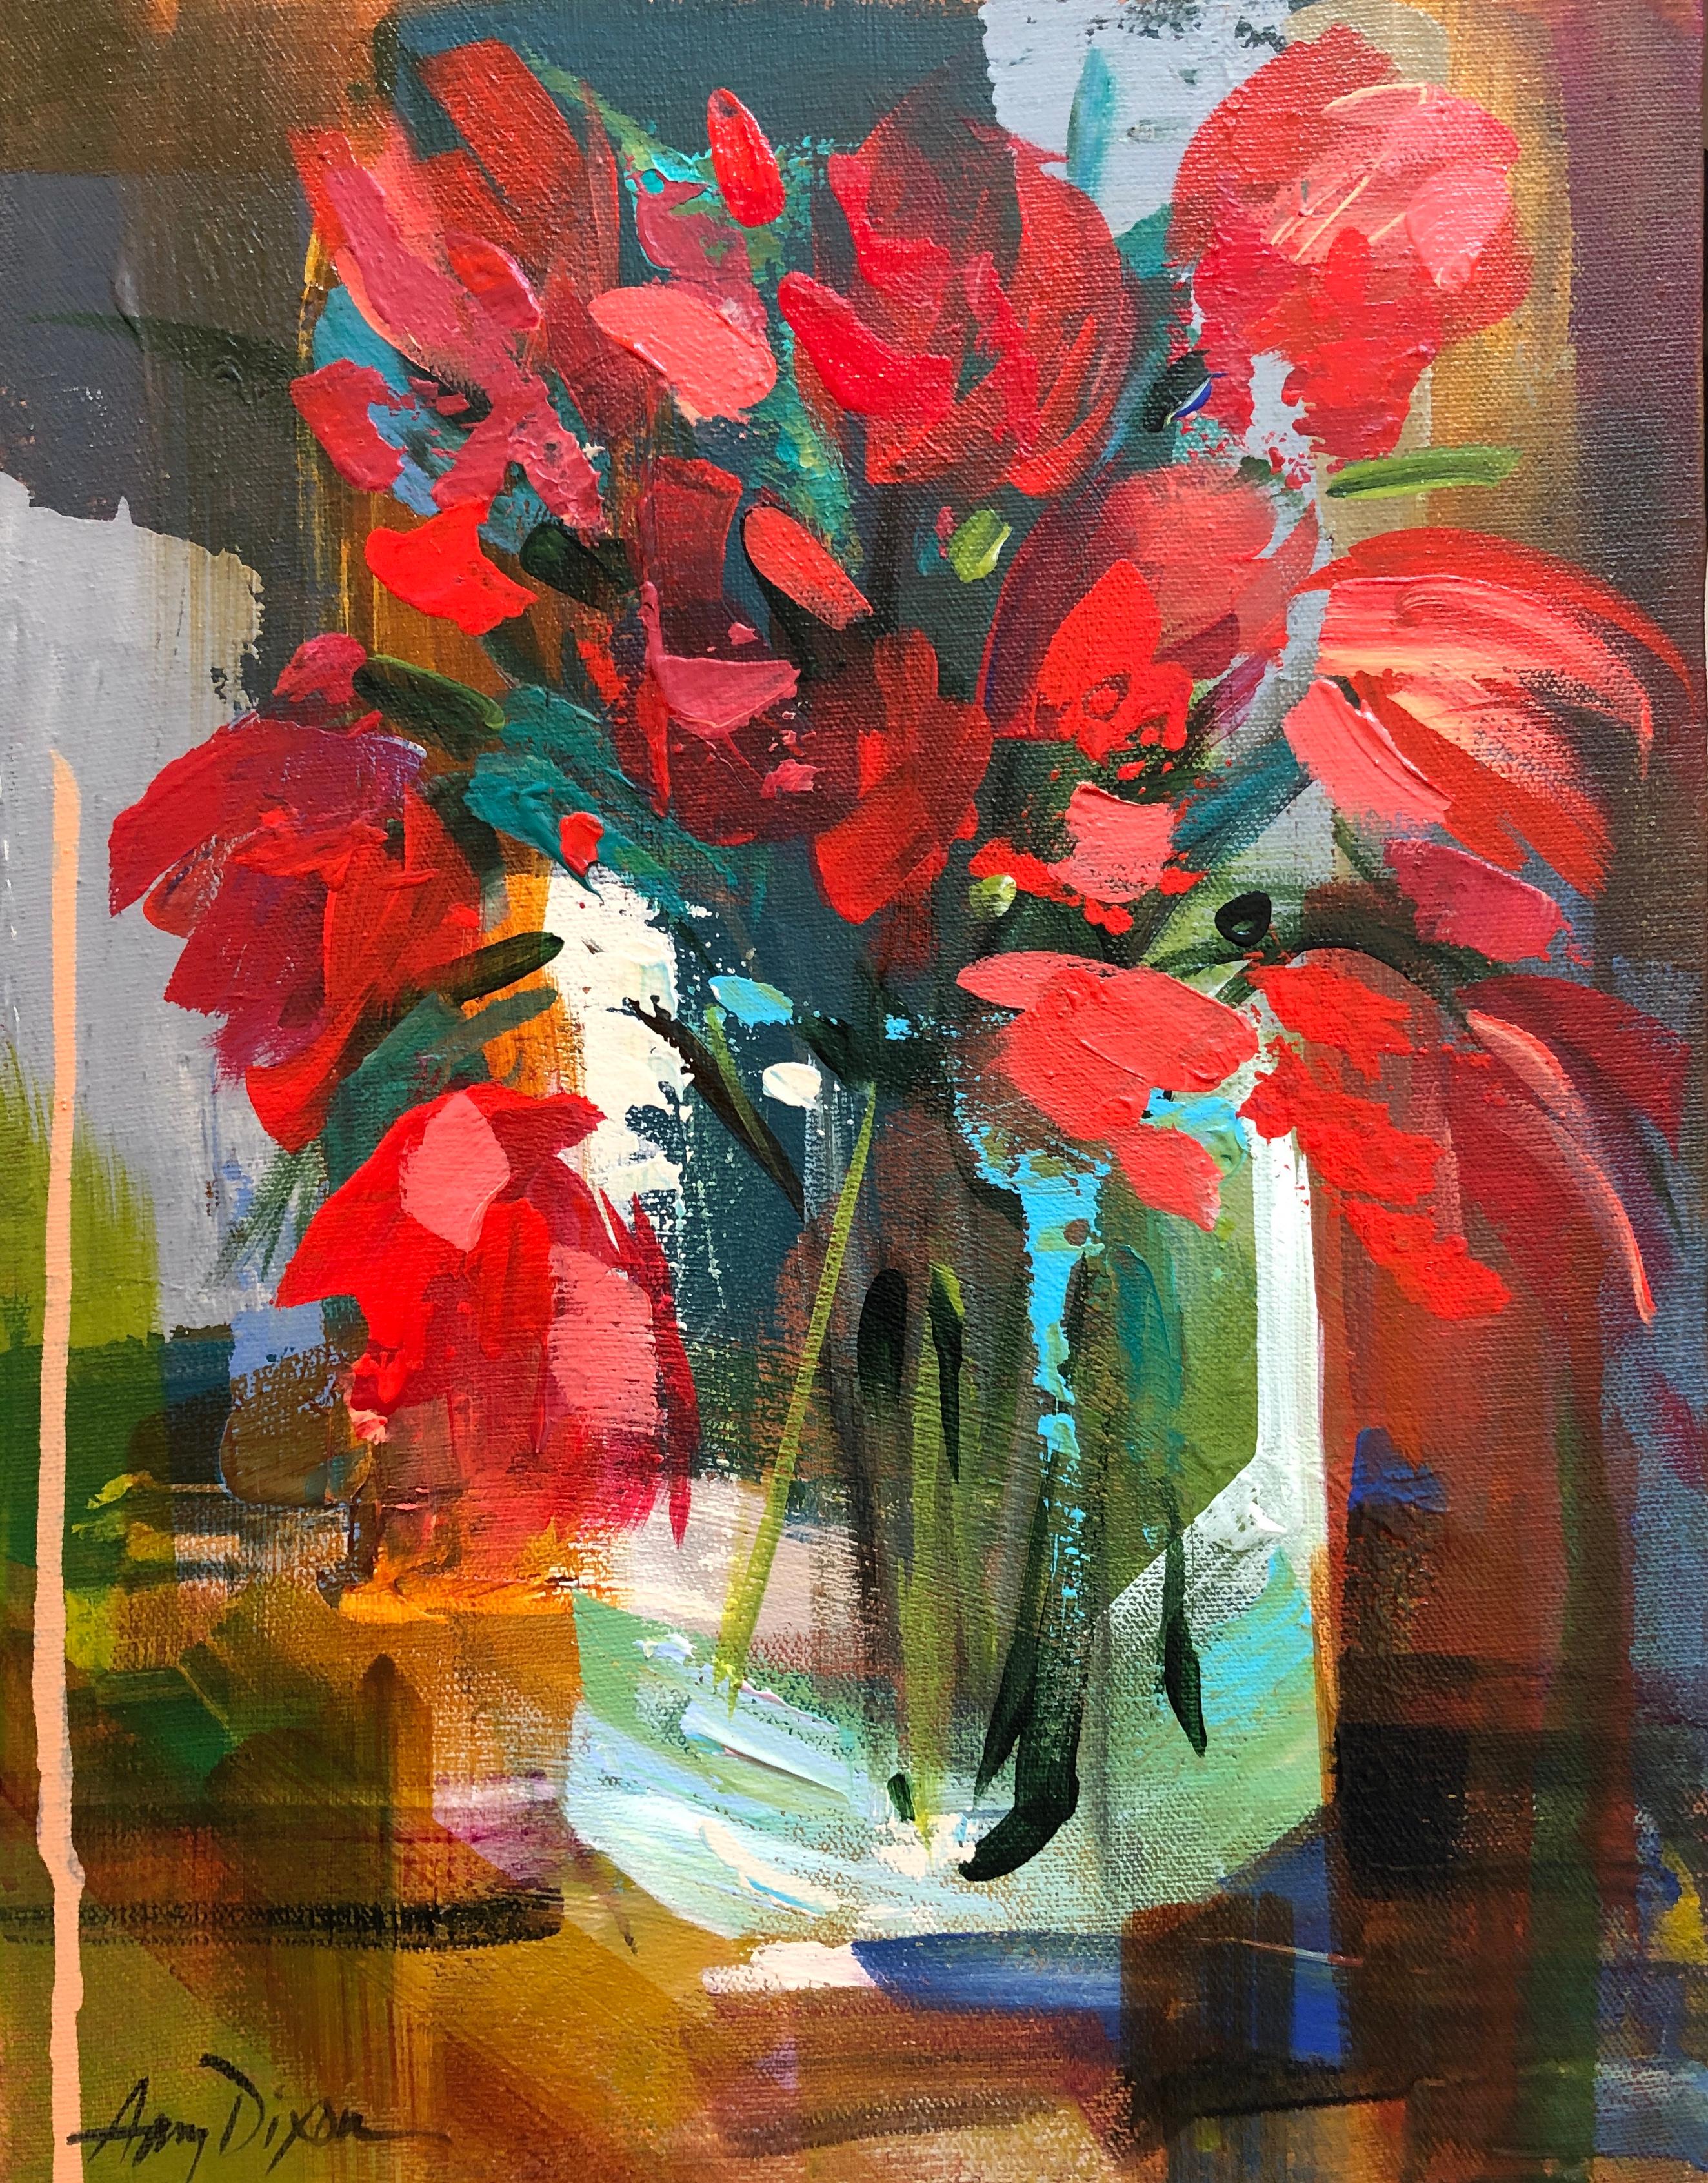 'Key to Her Heart' is a small abstracted acrylic on canvas floral painting of vertical format, created by American artist Amy Dixon in 2019. Featuring a vivid palette made of red, green, ochre and blue colors, this petite painting depicts a lovely